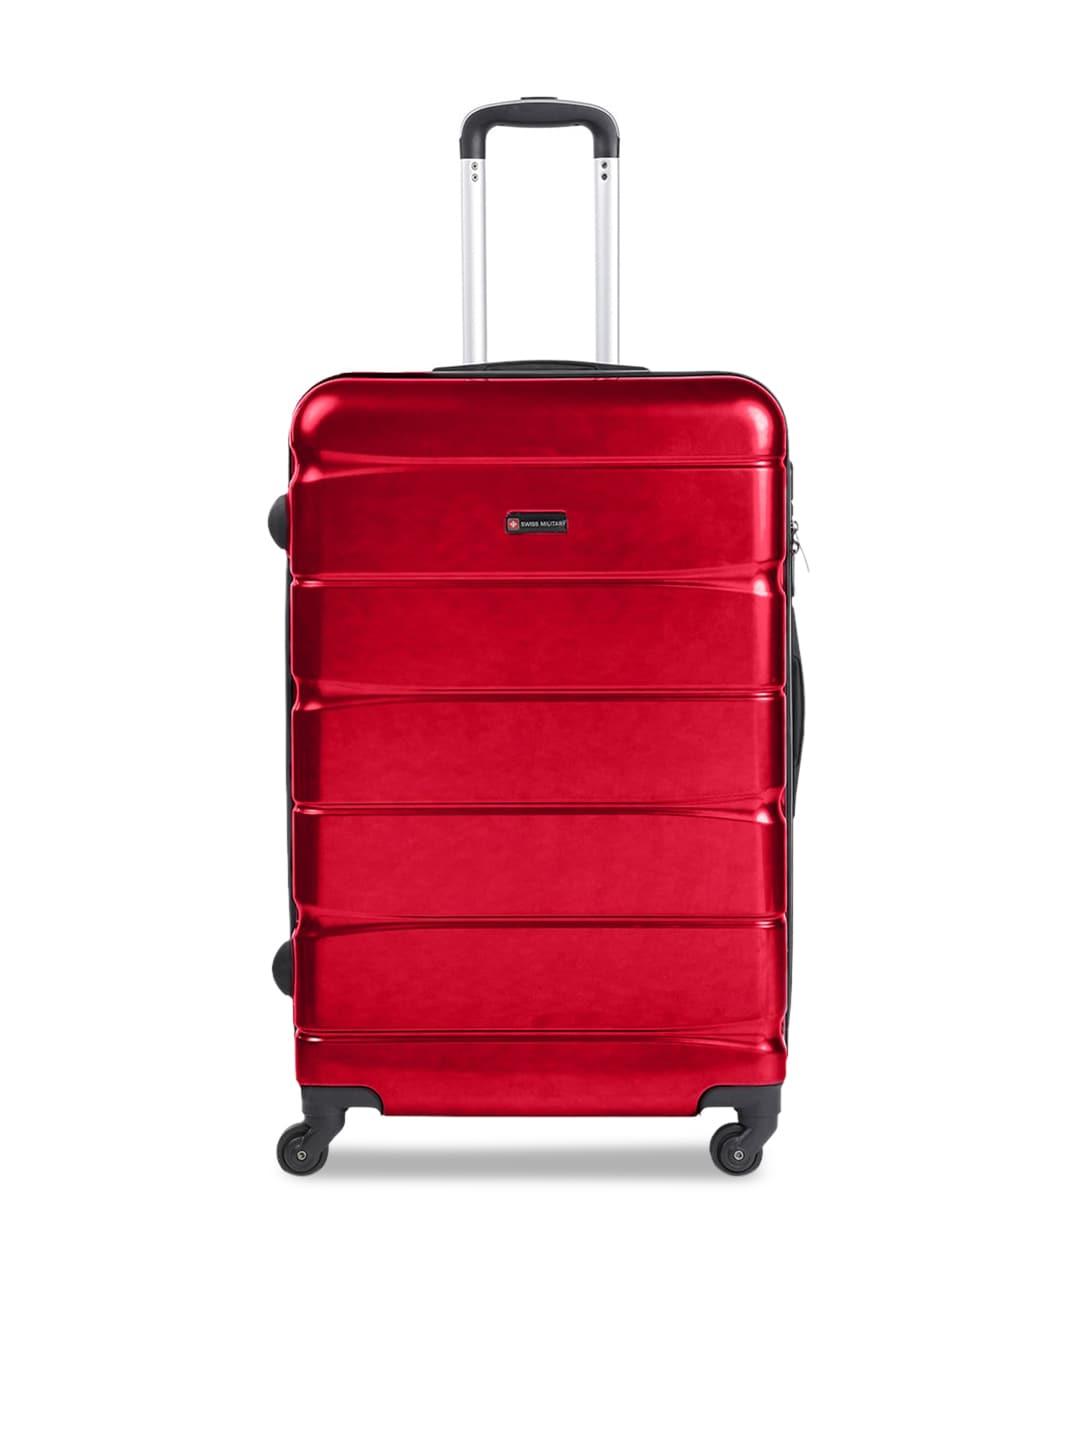 swiss military water resistant hard-sided trolley suitcase